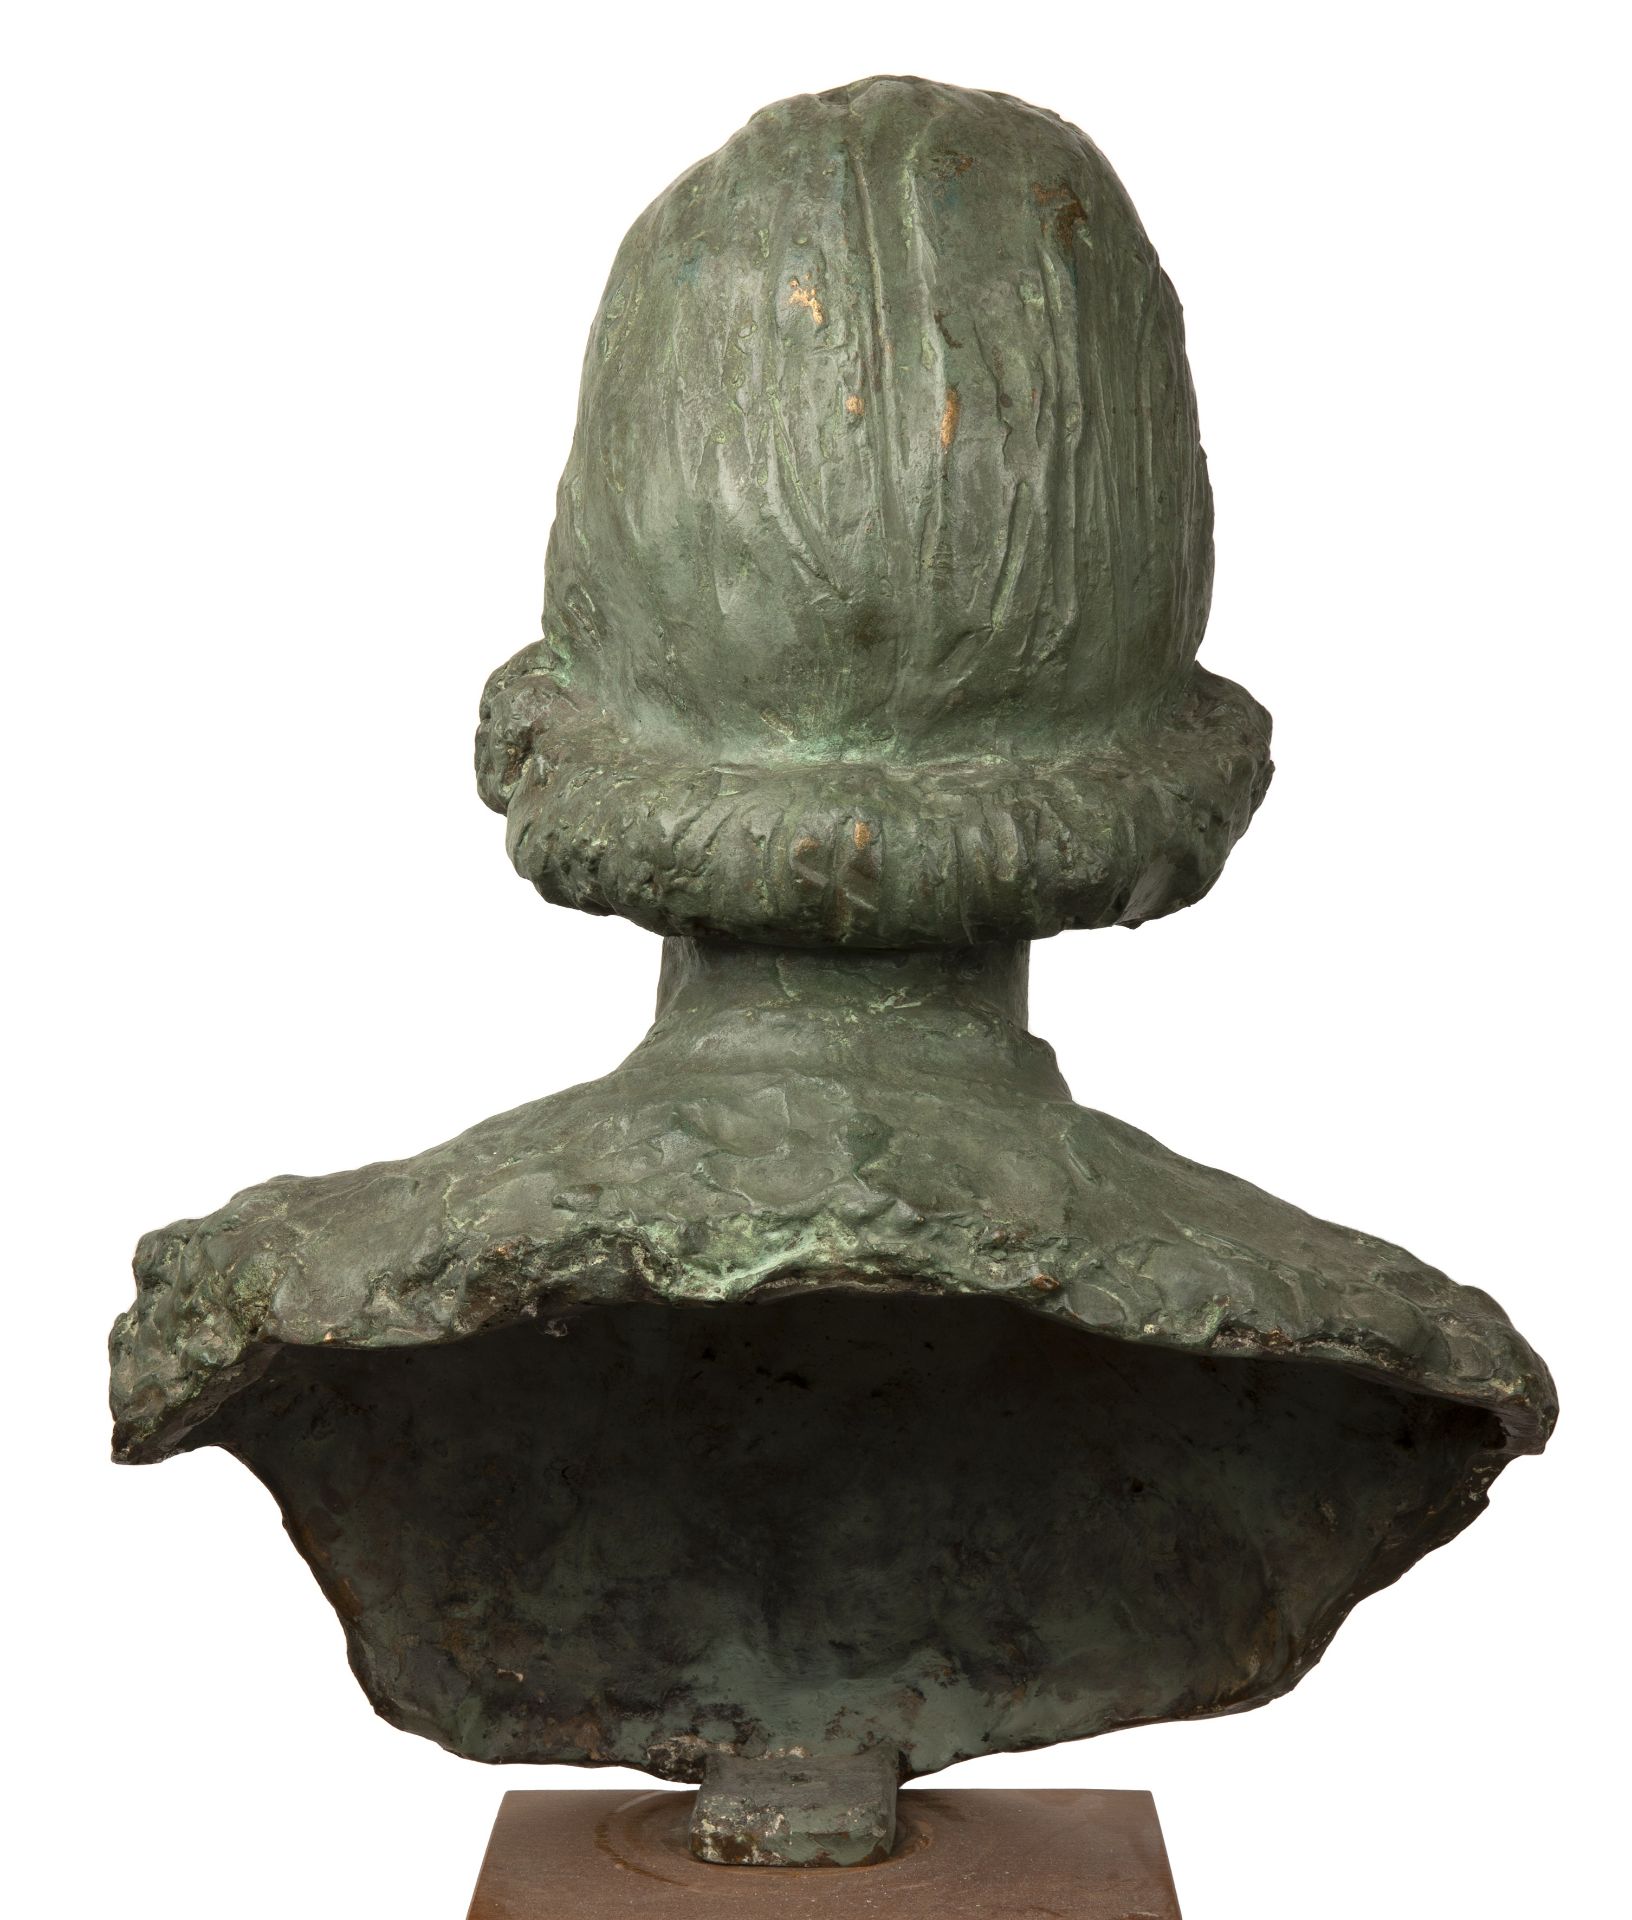 20th Century School 'Study of a lady' bronze bust, unsigned, on wooden plinth, 57cm high overall - Image 4 of 4